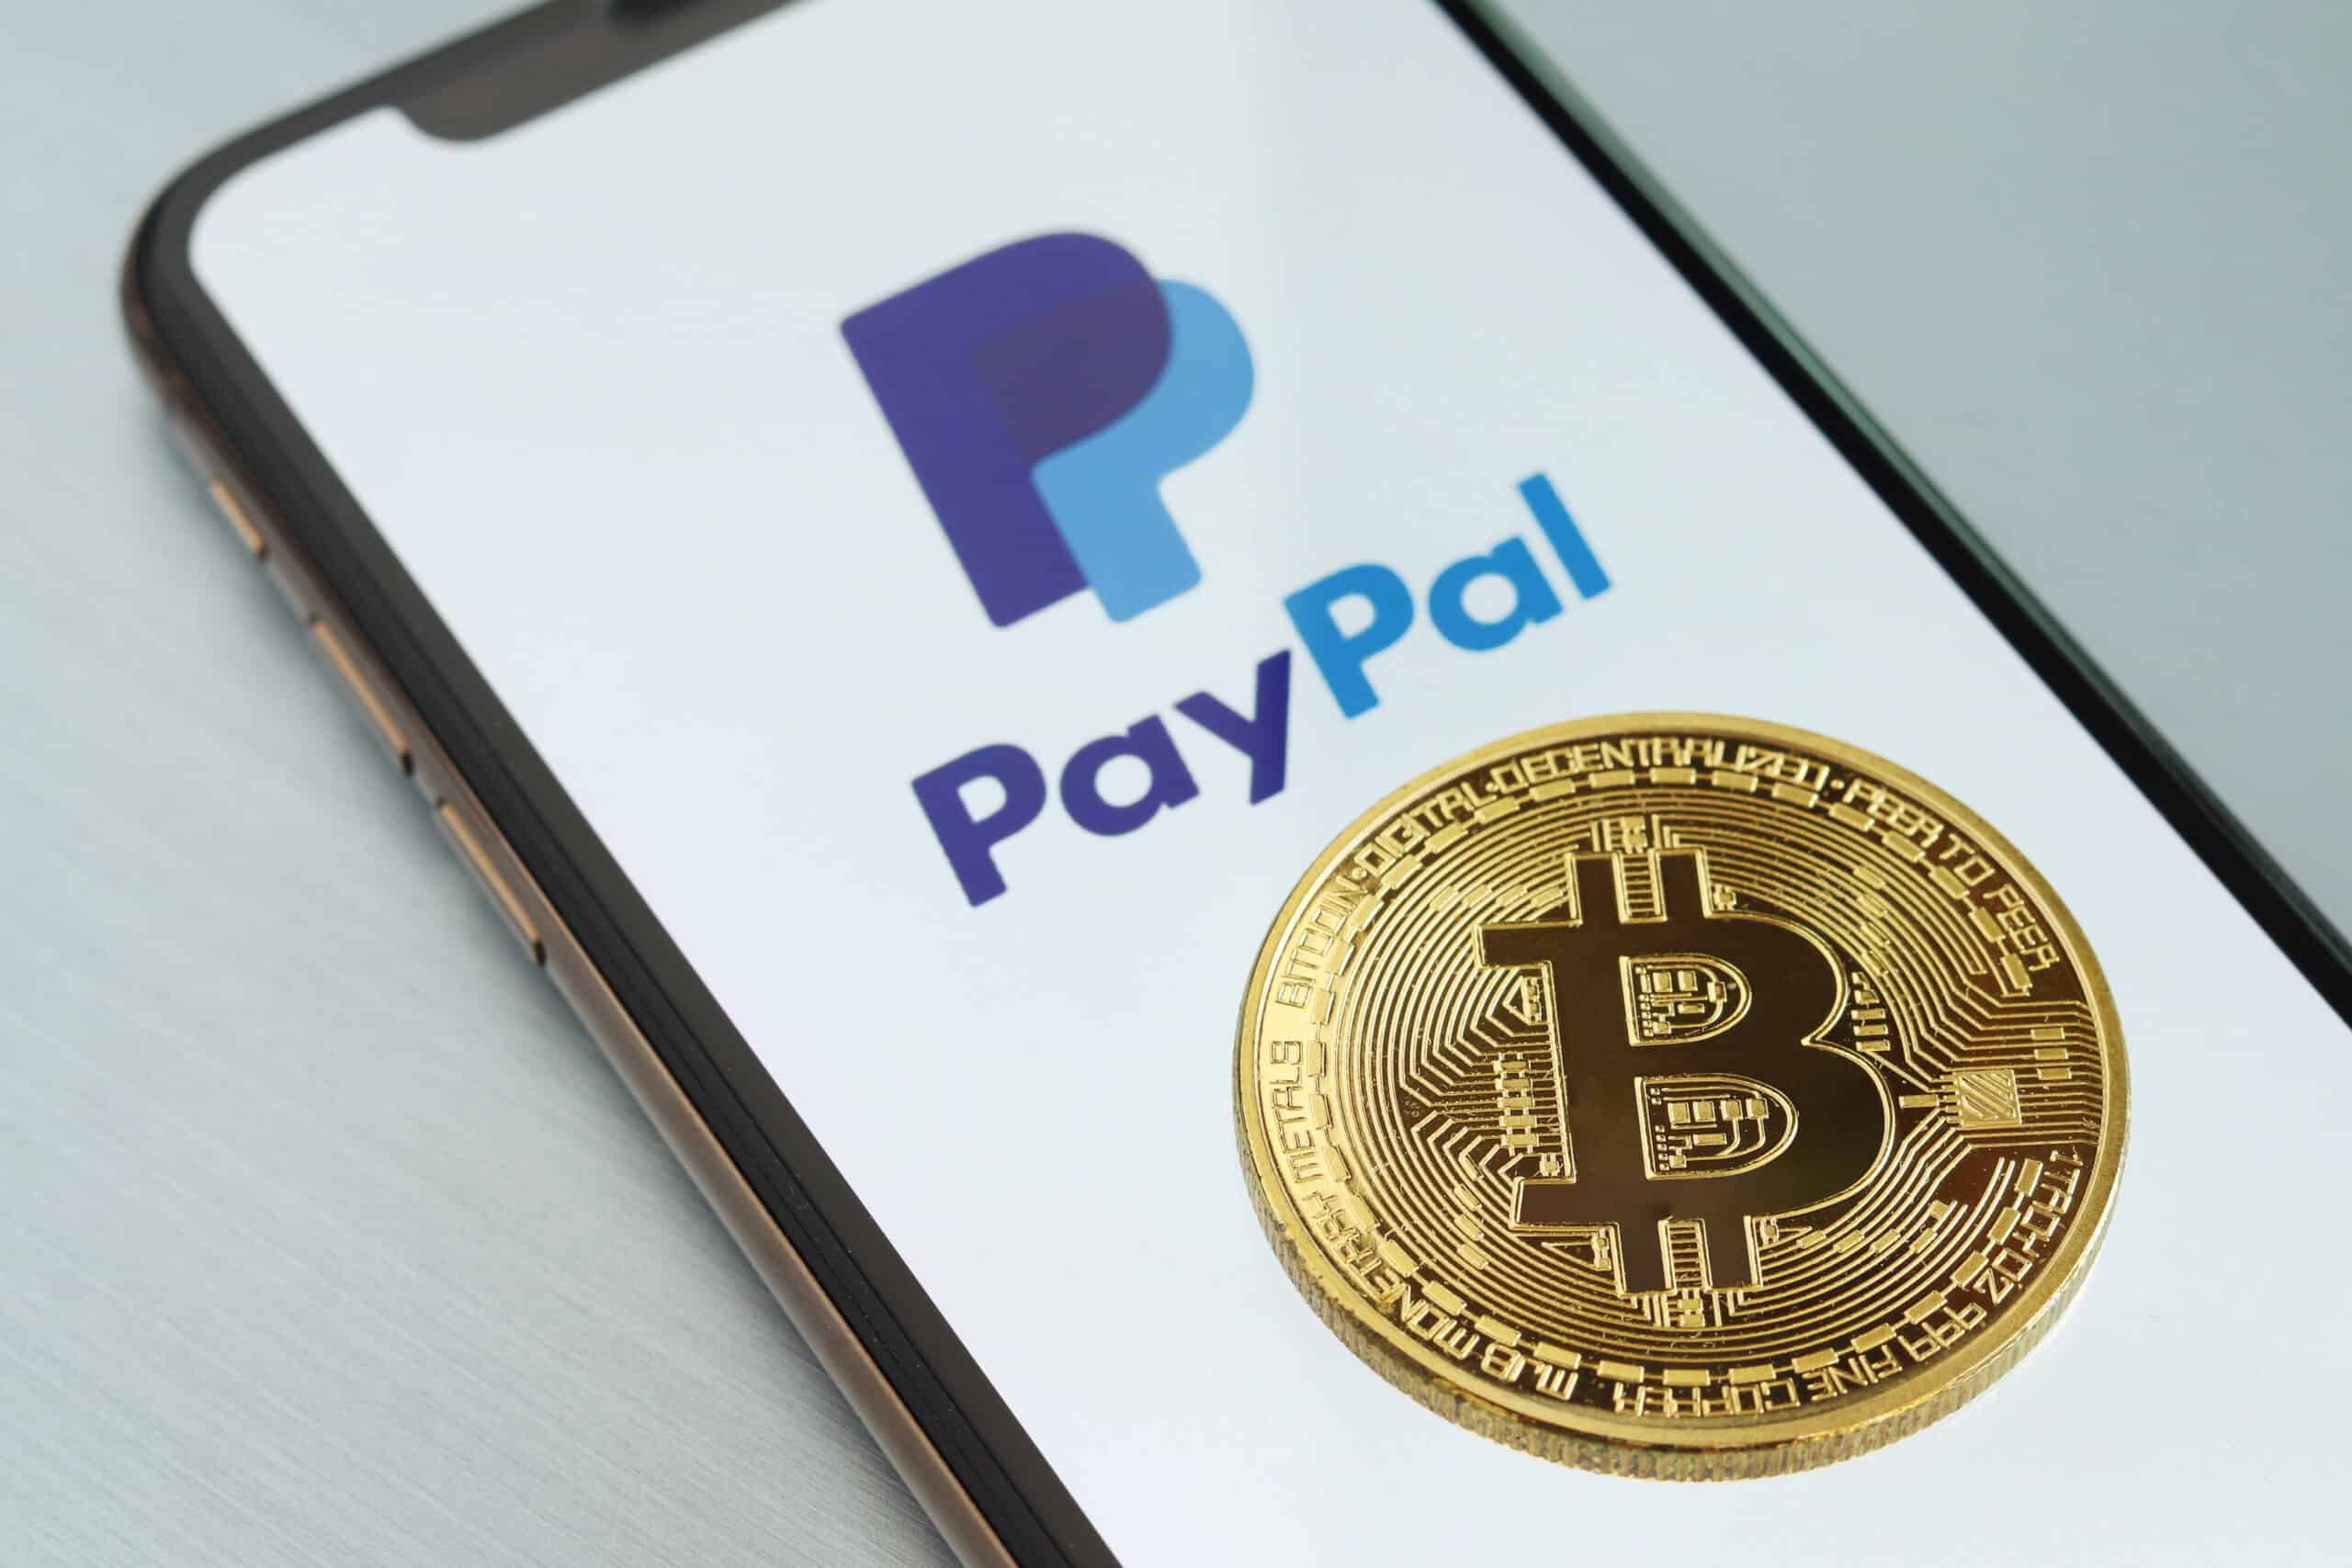 Why is my cryptocurrency sale on hold? | PayPal US